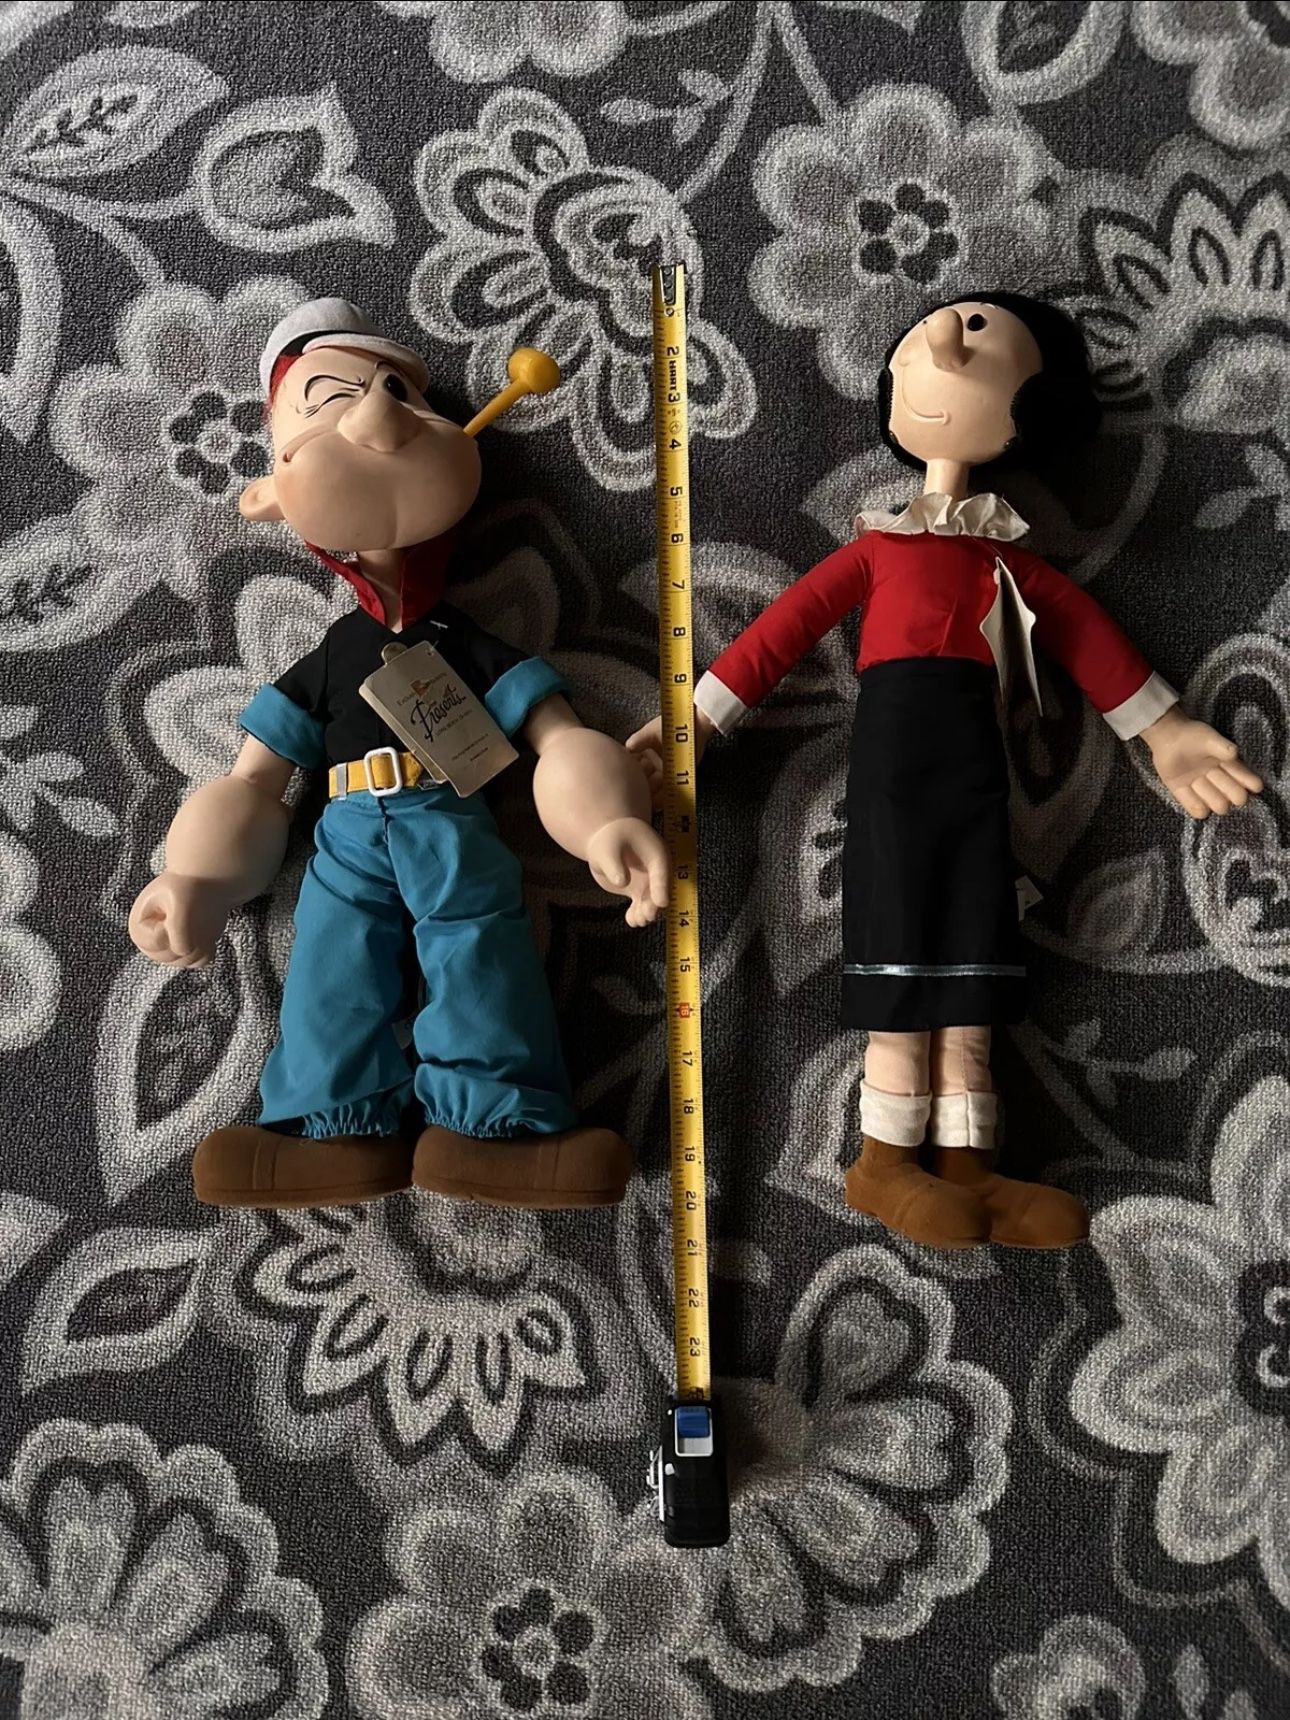 Popeye and Olive Oyl Vintage Collectible Dolls by Presents Set (20 Inches Tall)